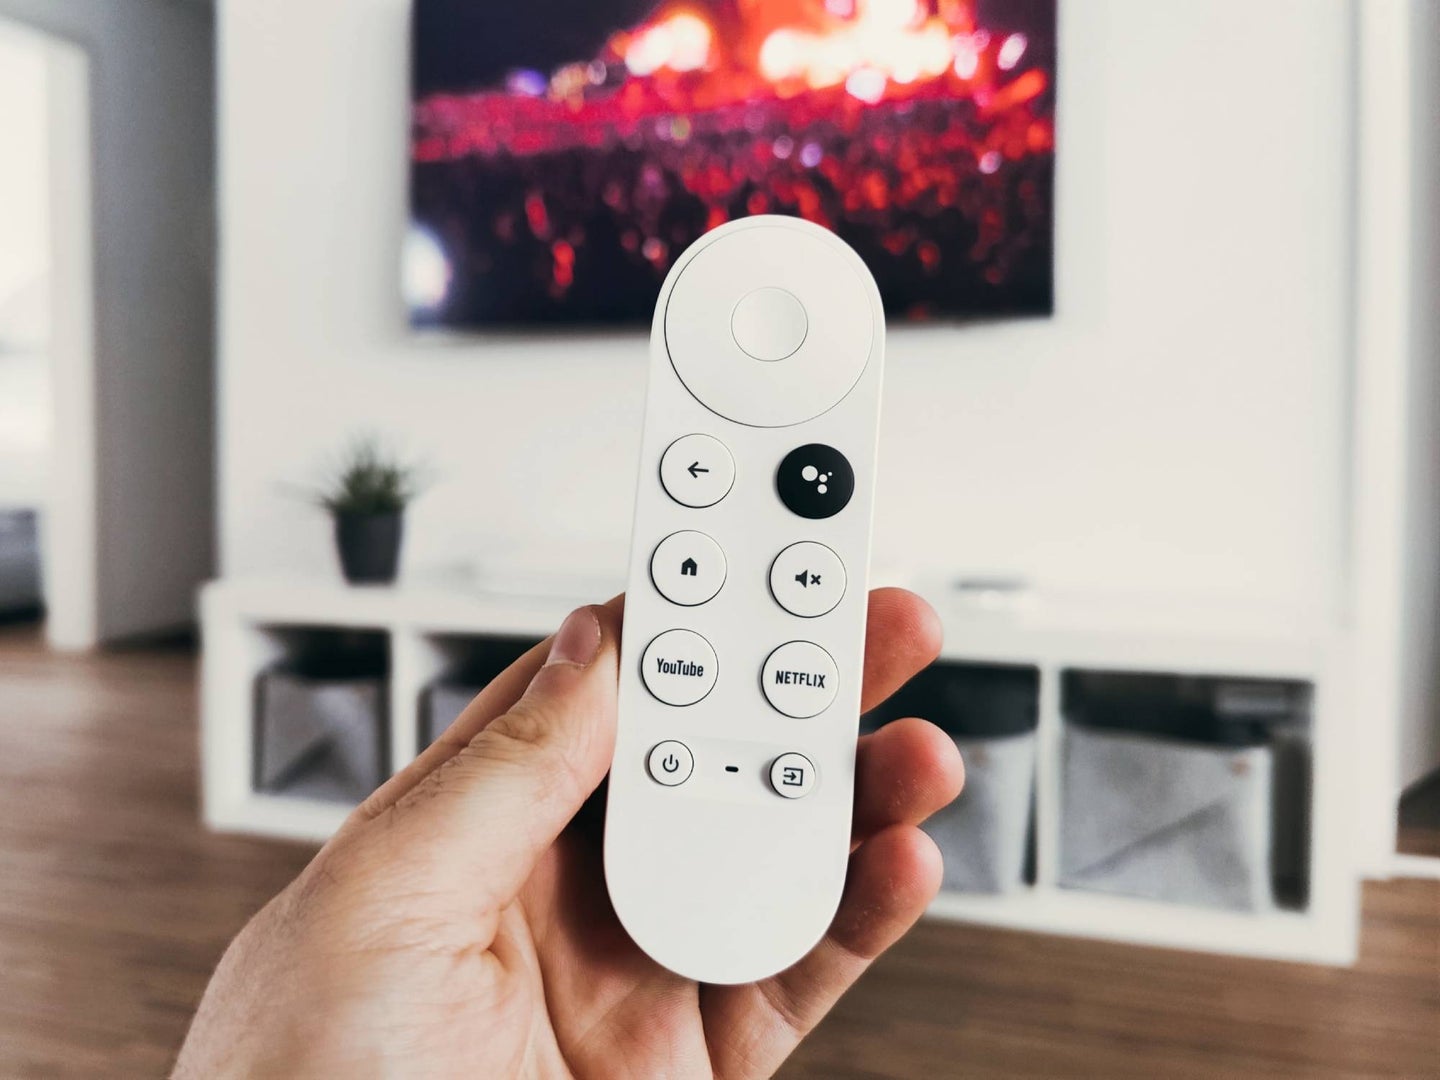 Hand holding a google tv remote